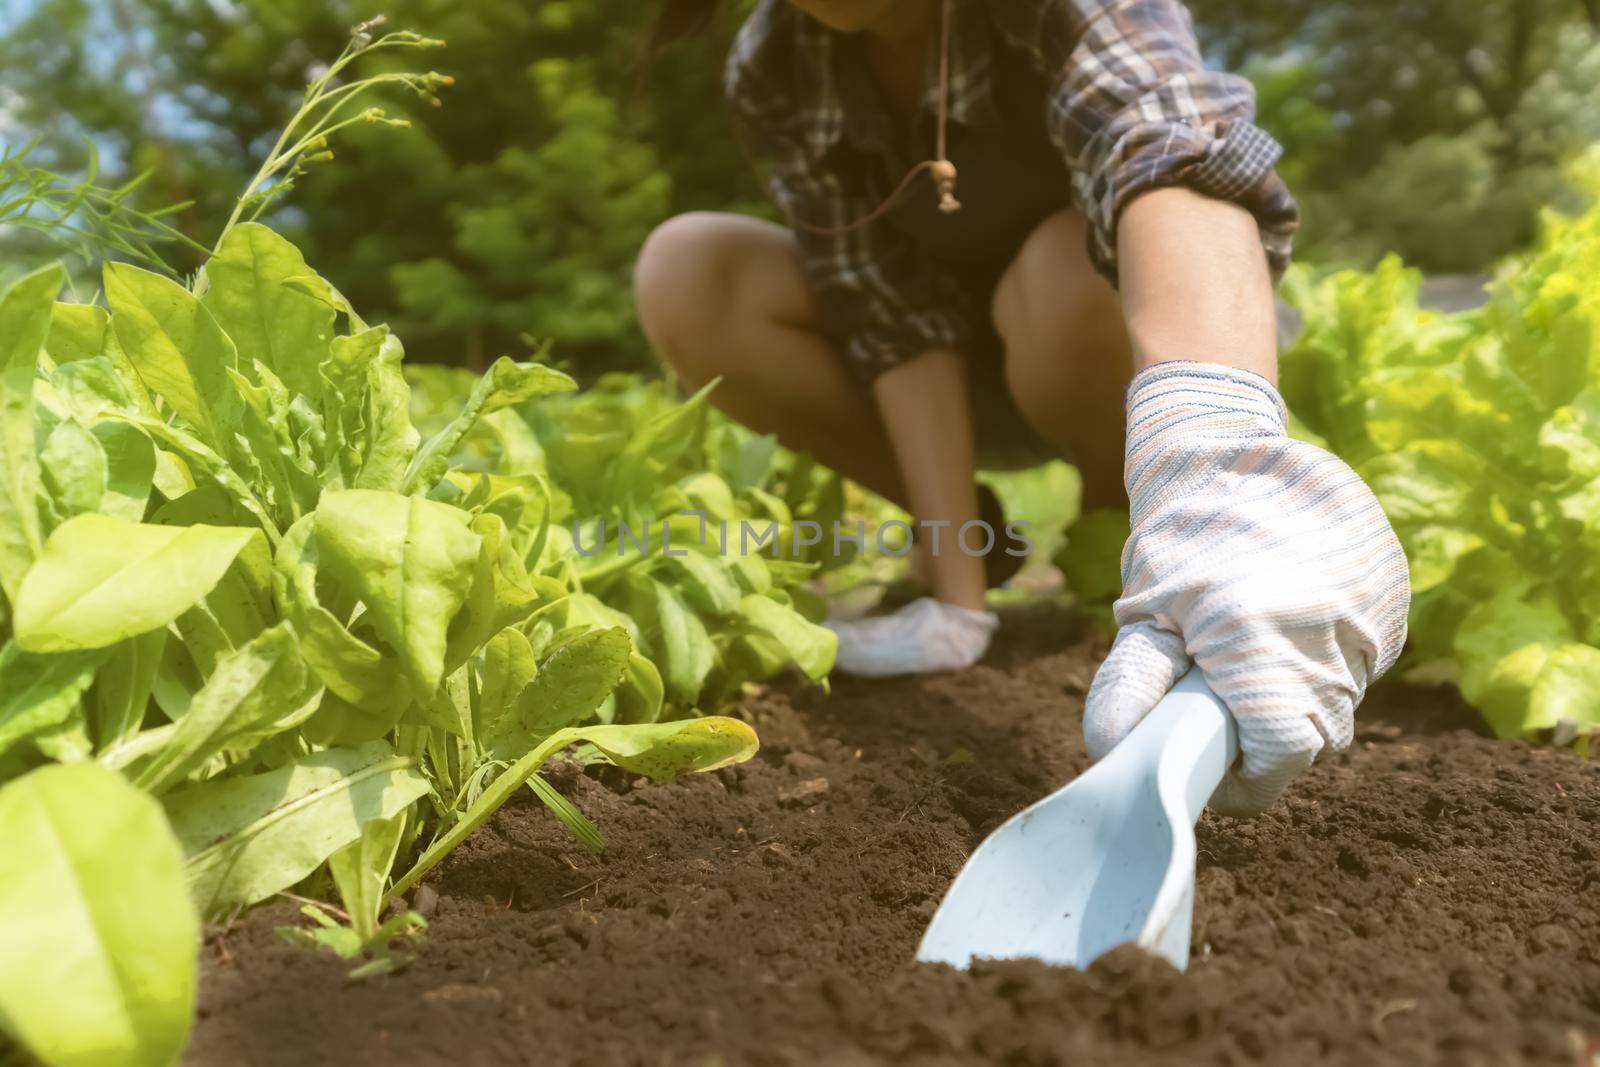 A young girl in work gloves prepares the earth in a vegetable garden with fresh herbs for planting new seedlings. The gardener removes the weed and digs up the black soil.